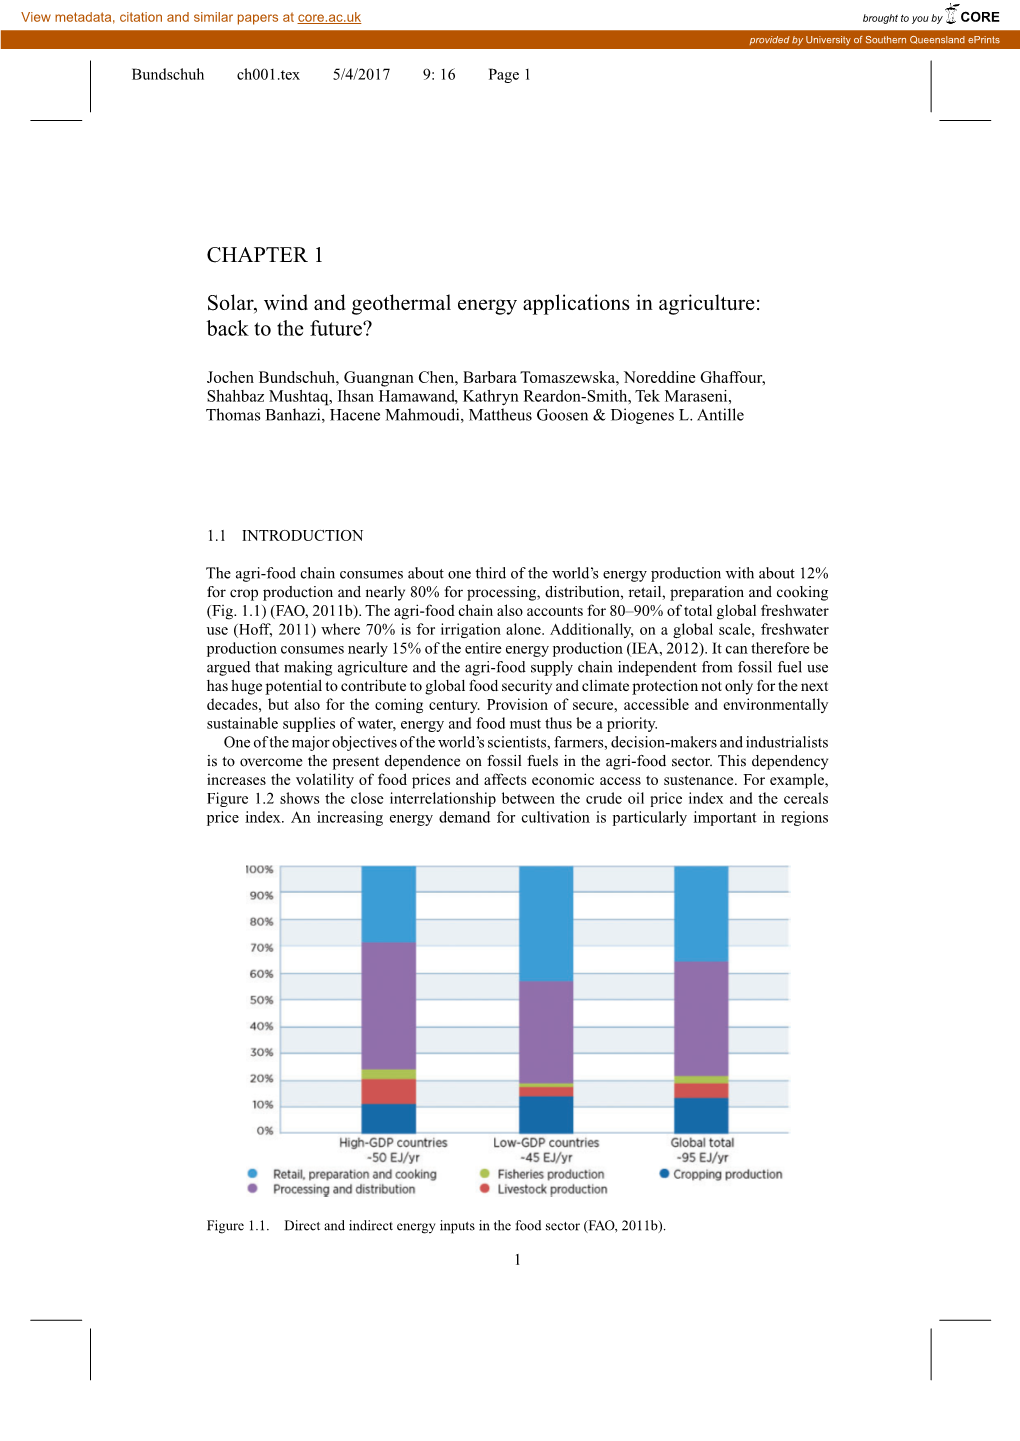 CHAPTER 1 Solar, Wind and Geothermal Energy Applications In